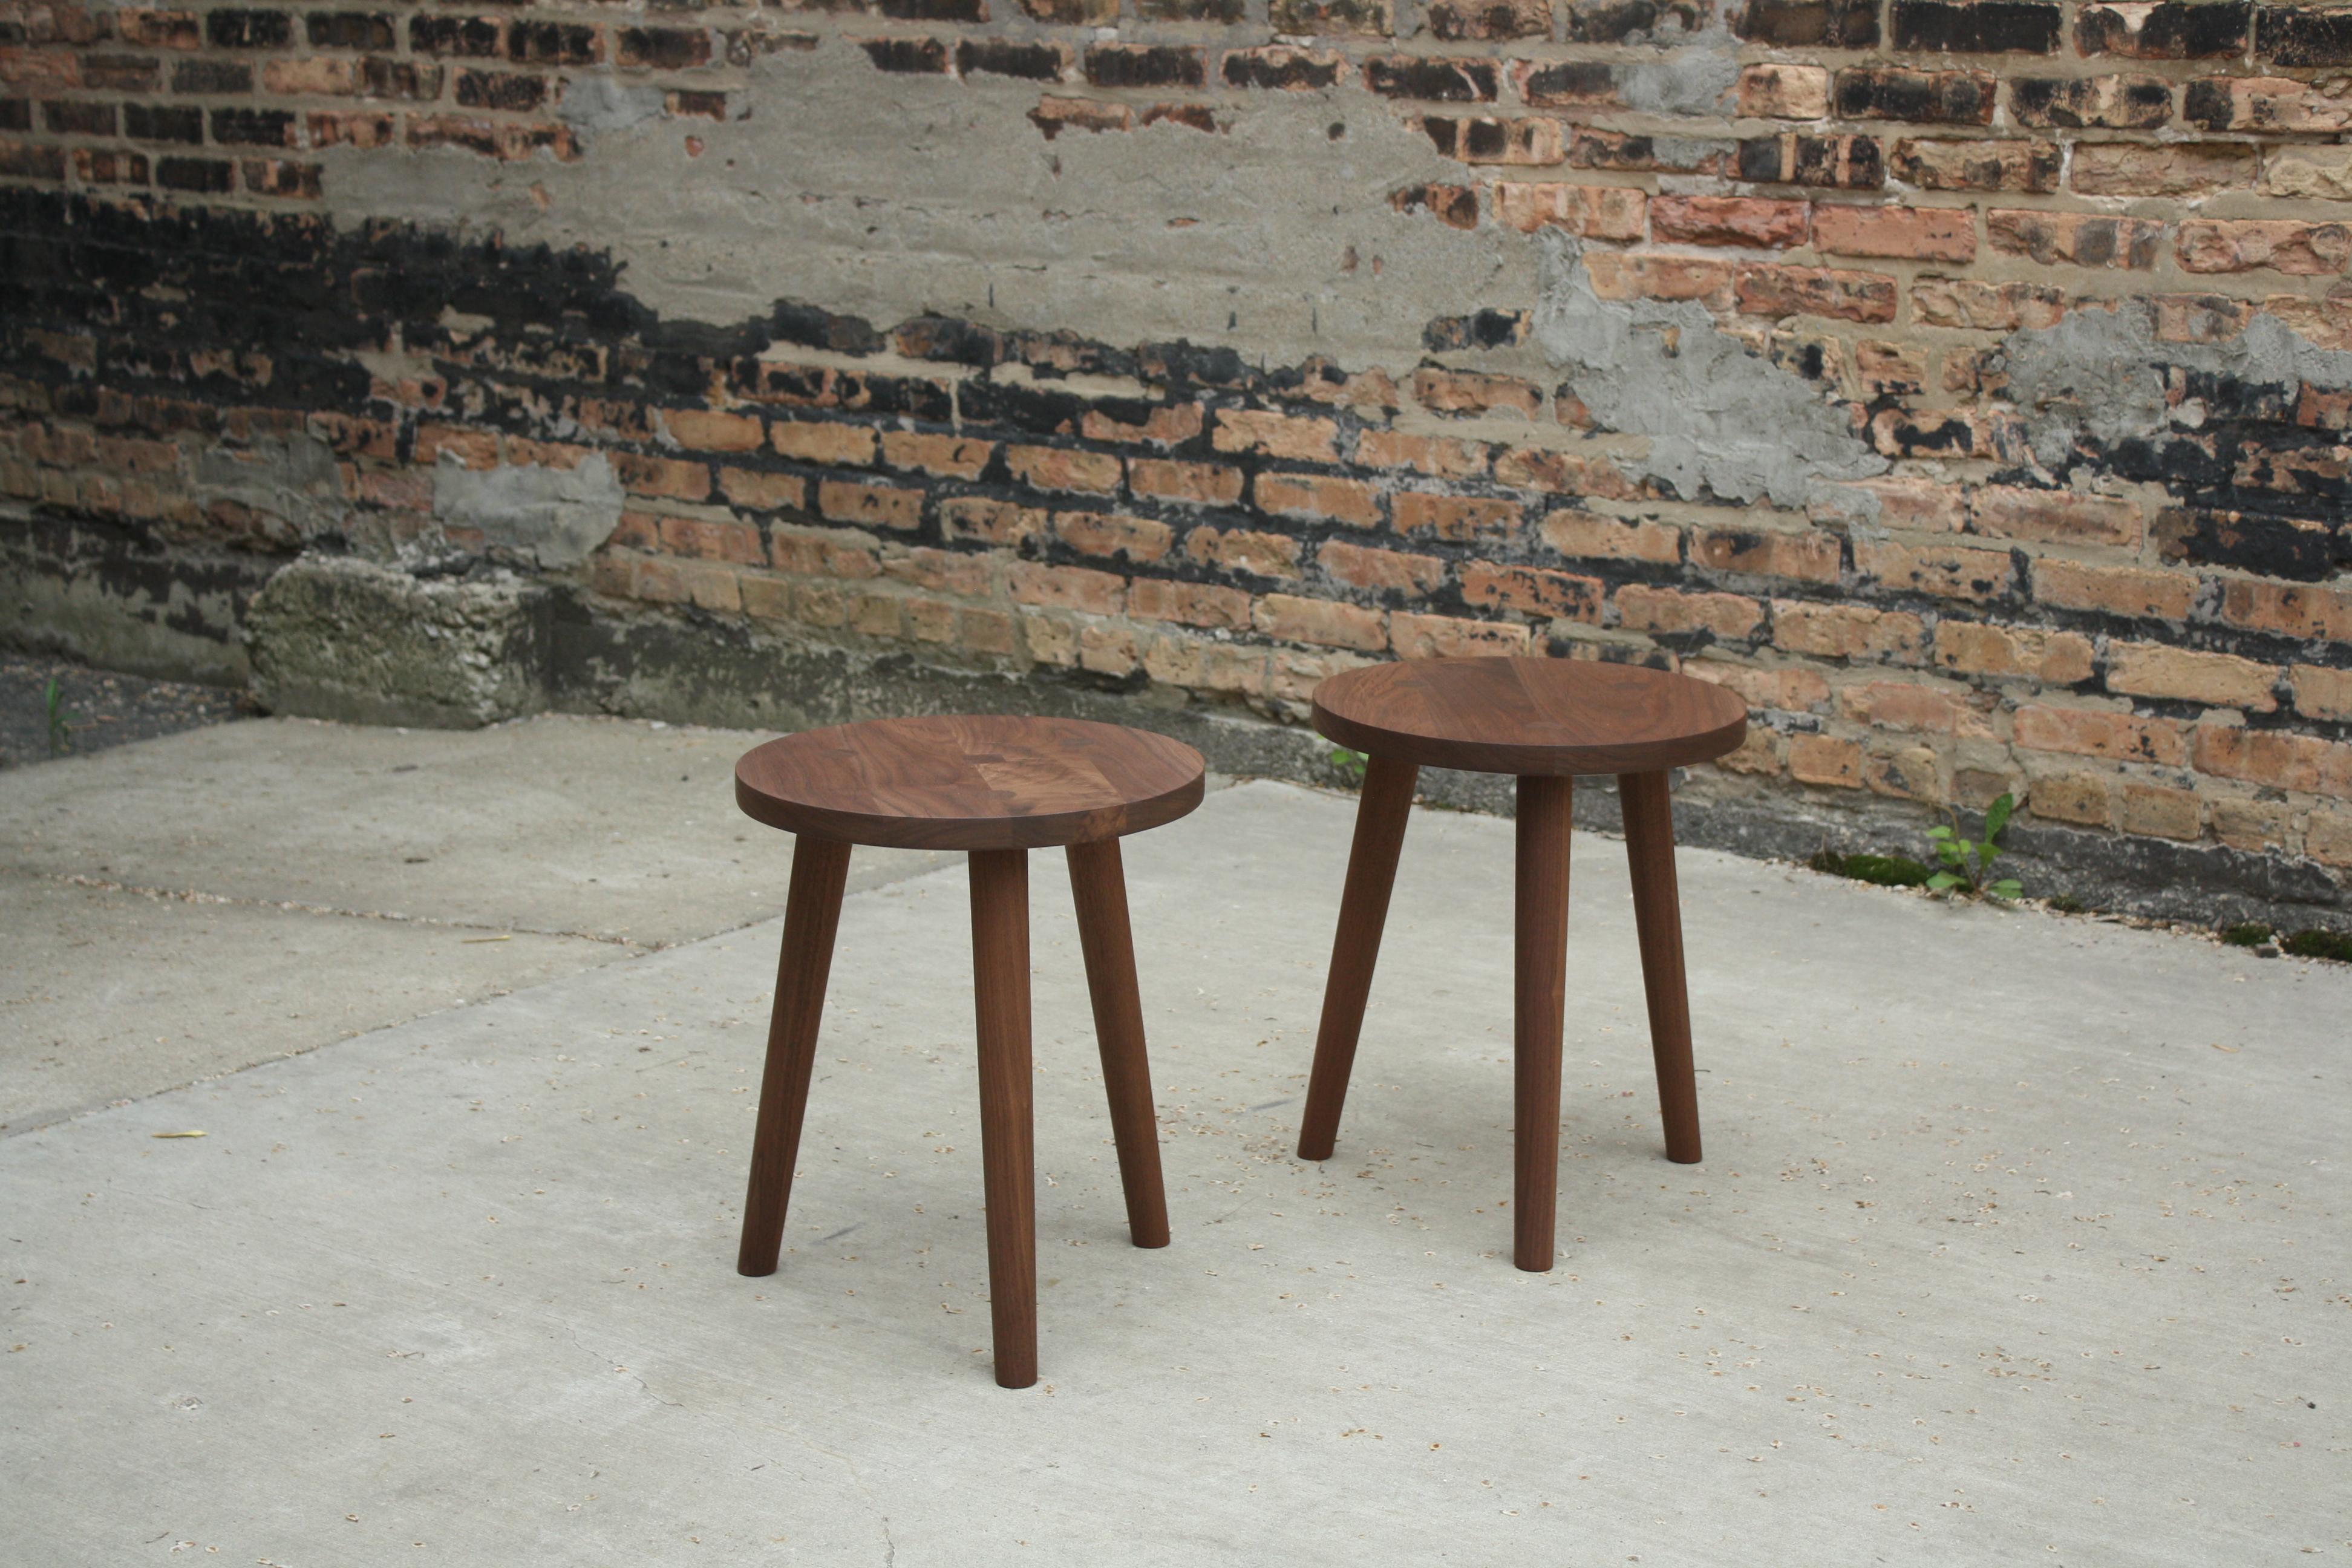 American Bare a Handmade Wood Table by Laylo Studio For Sale